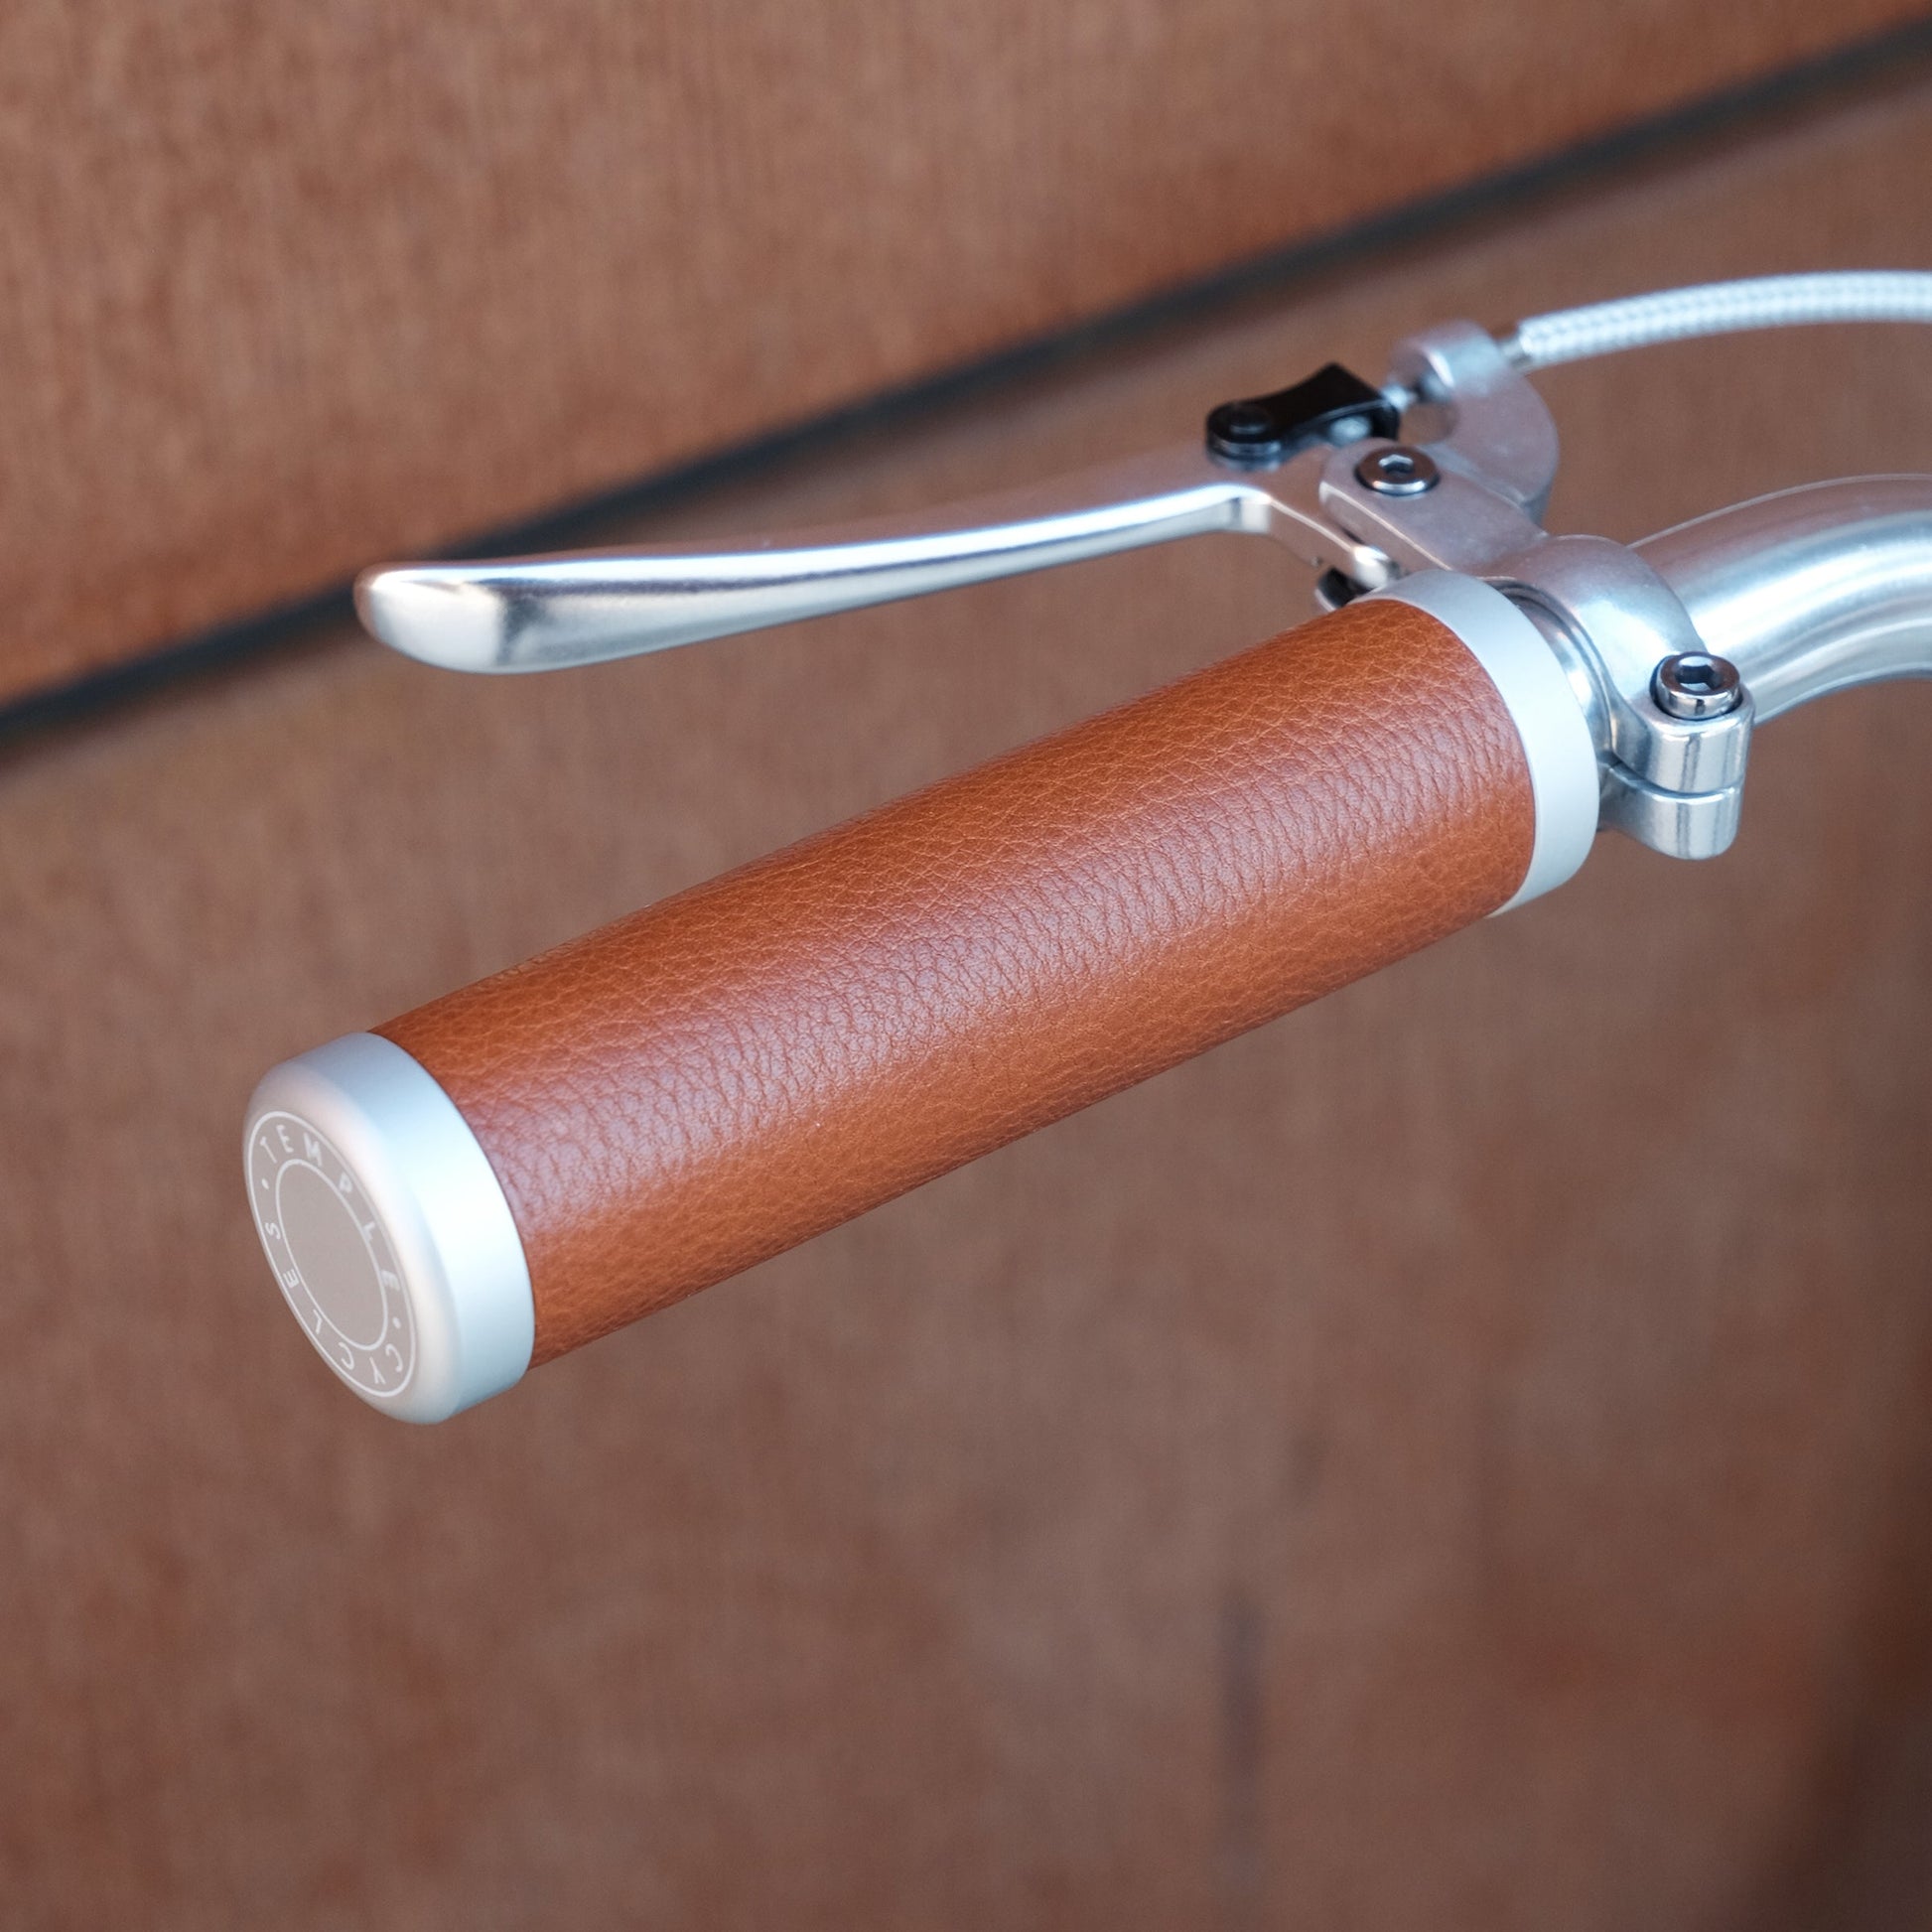 PREMIUM LEATHER GRIPS - Temple Outdoor